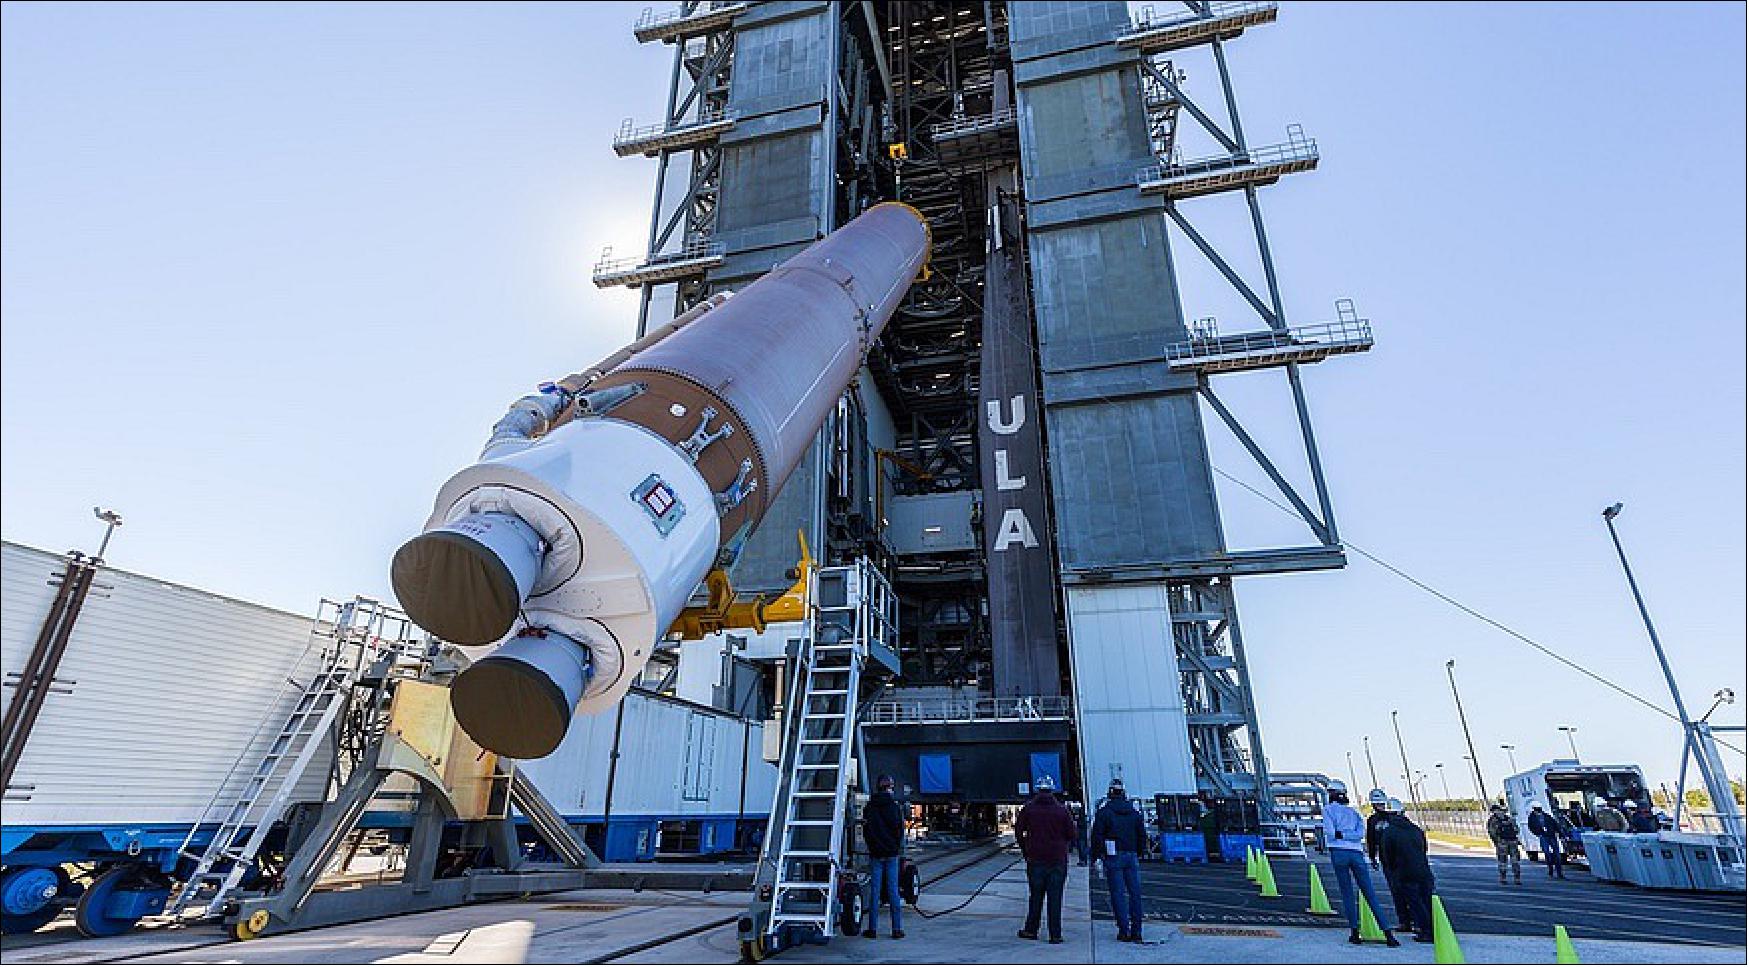 Figure 8: The first stage of the Atlas 5 that will launch the GOES-T weather satellite arrives at ULA's Vertical Integration Facility at Space Launch Complex 41 (image credit: ULA)